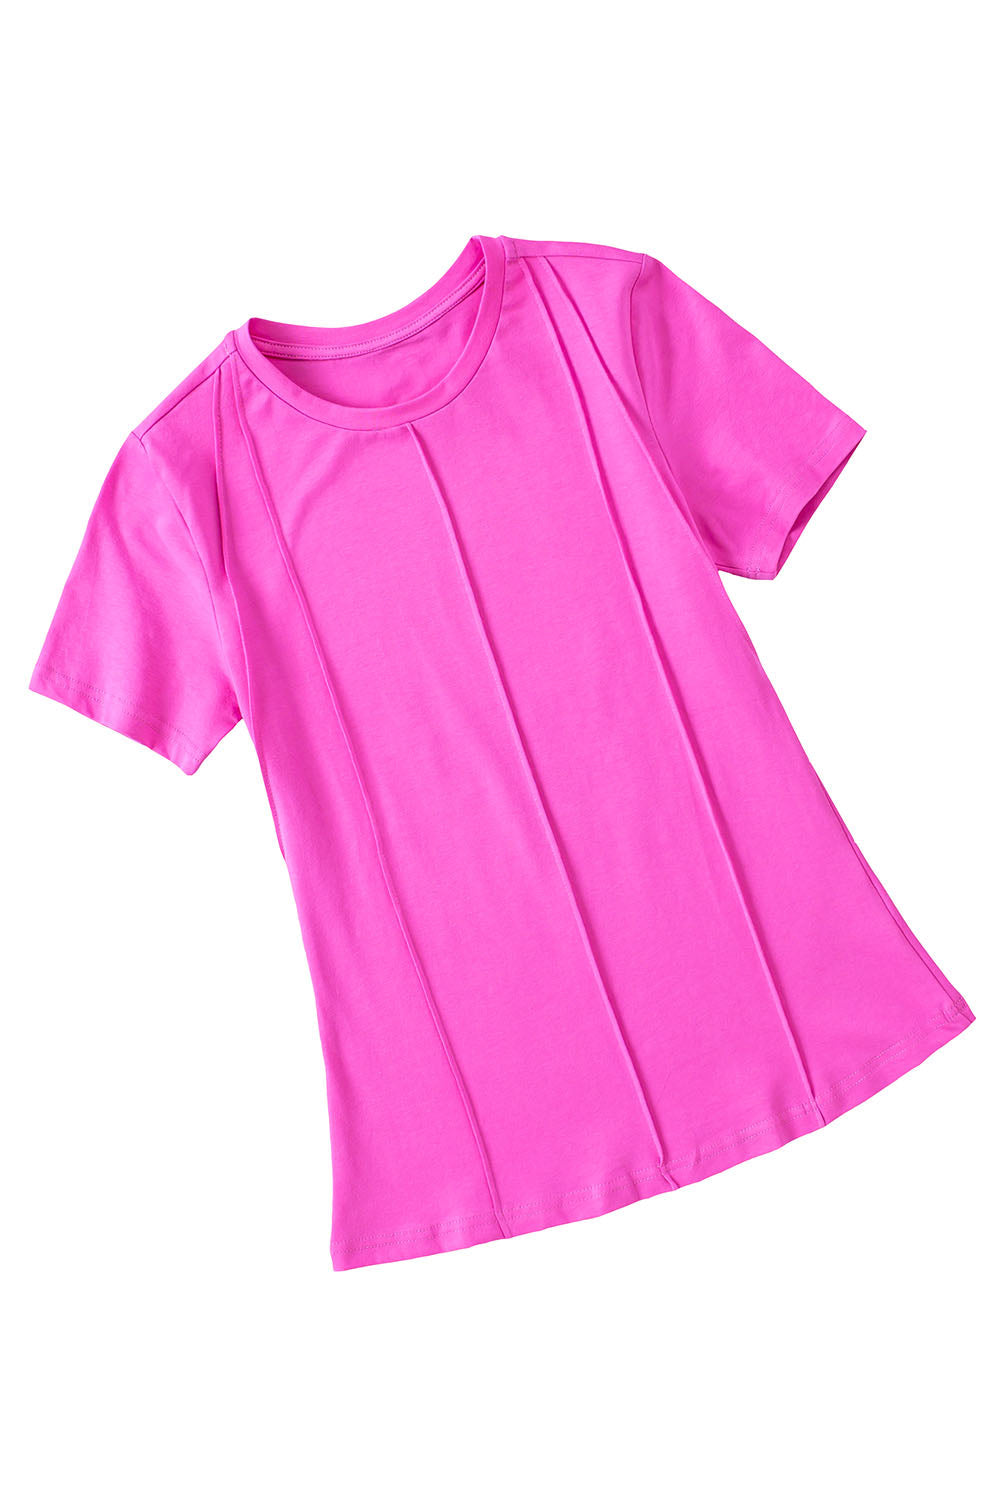 Rose Solid Color Piping Trim Short Sleeve T Shirt